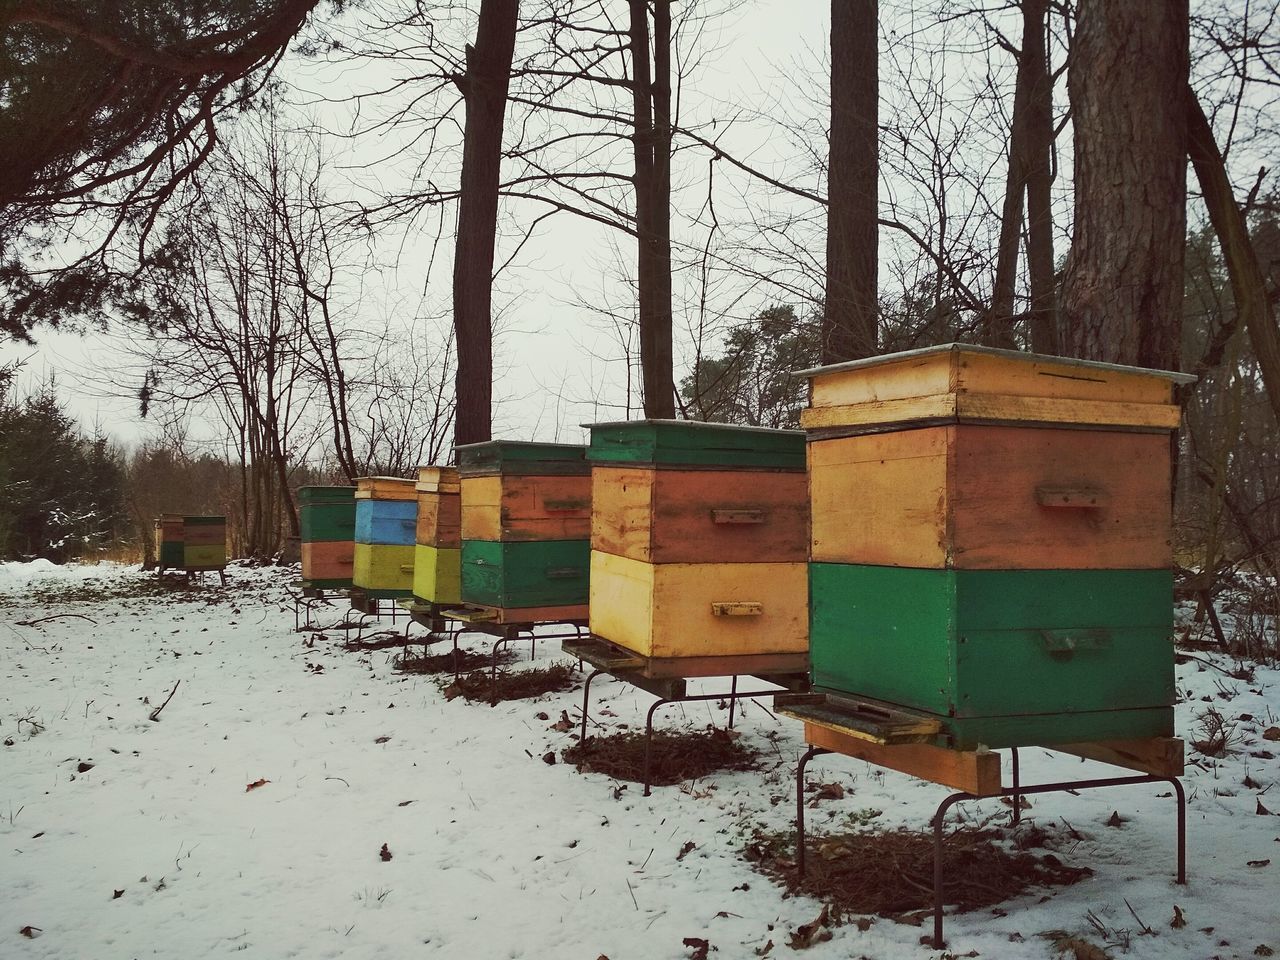 snow, winter, cold temperature, tree, nature, beehive, no people, day, bare tree, apiculture, outdoors, bee, sky